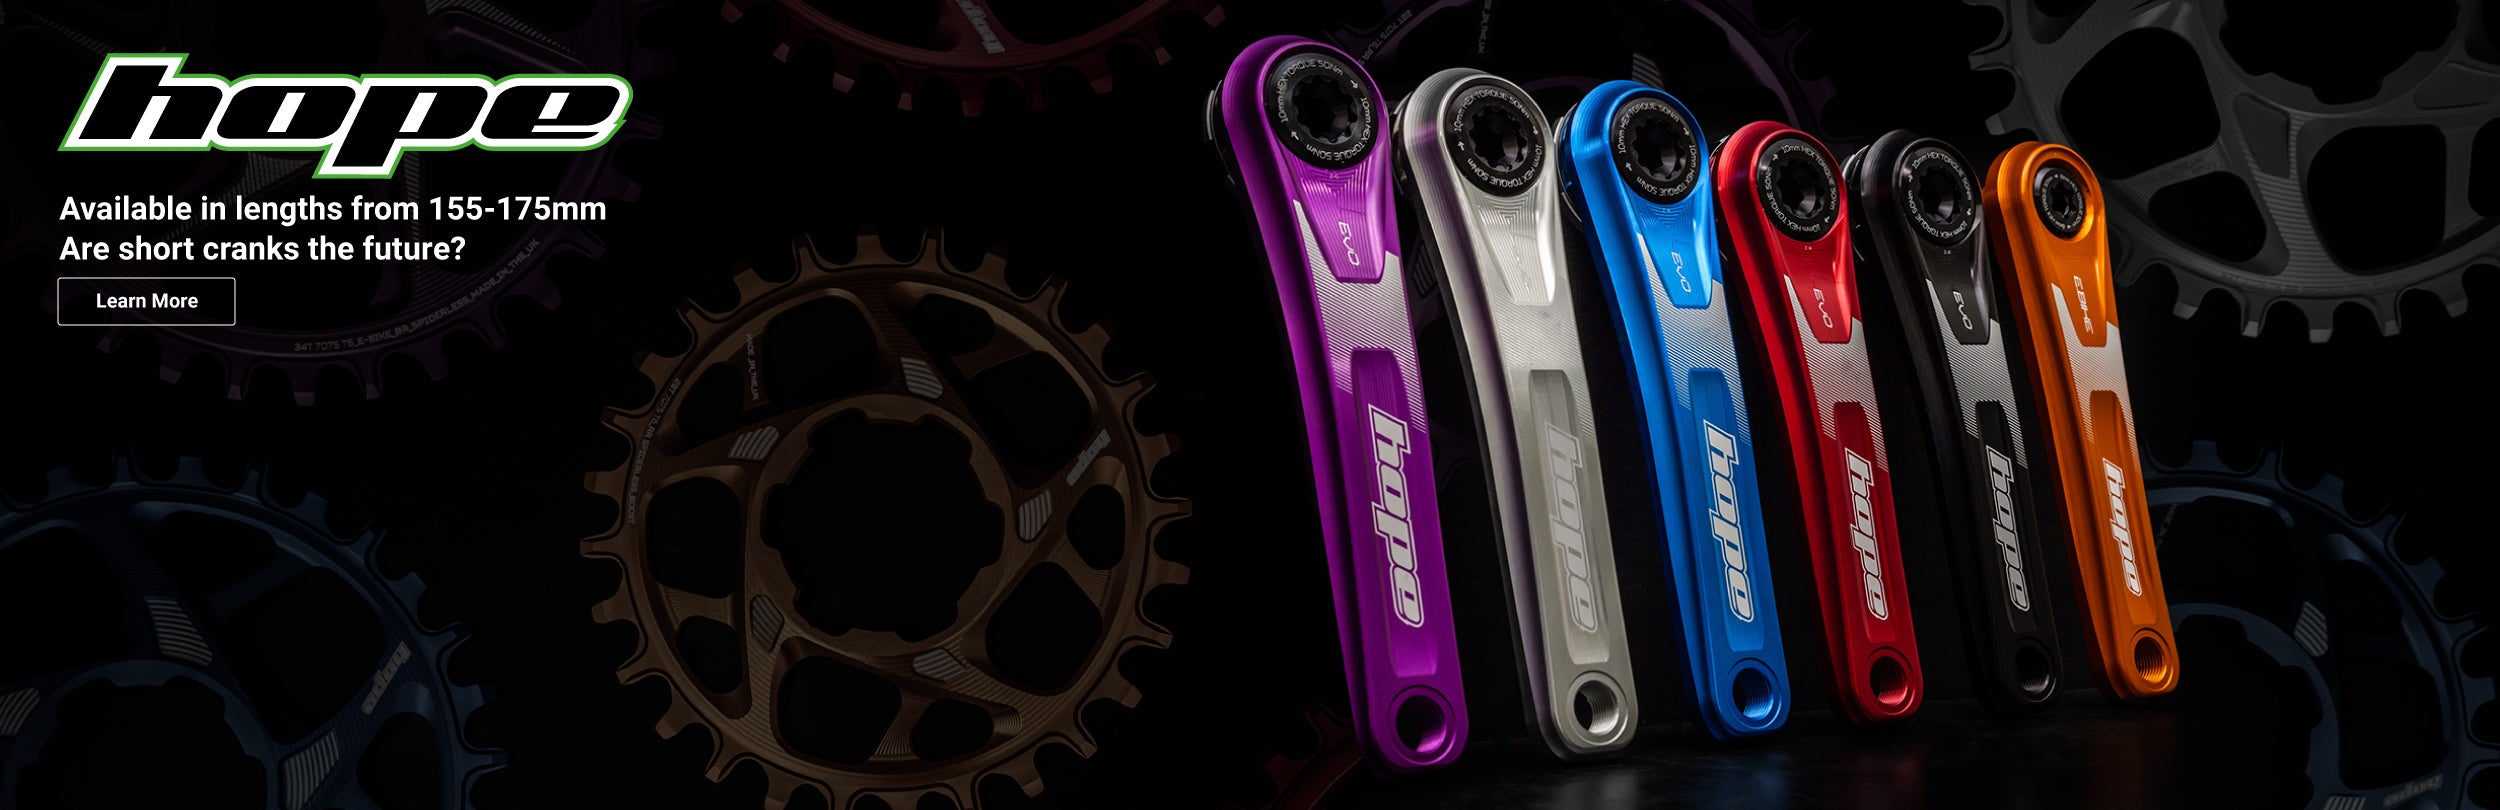 Learn about Hope's range of 155-175mm cranks